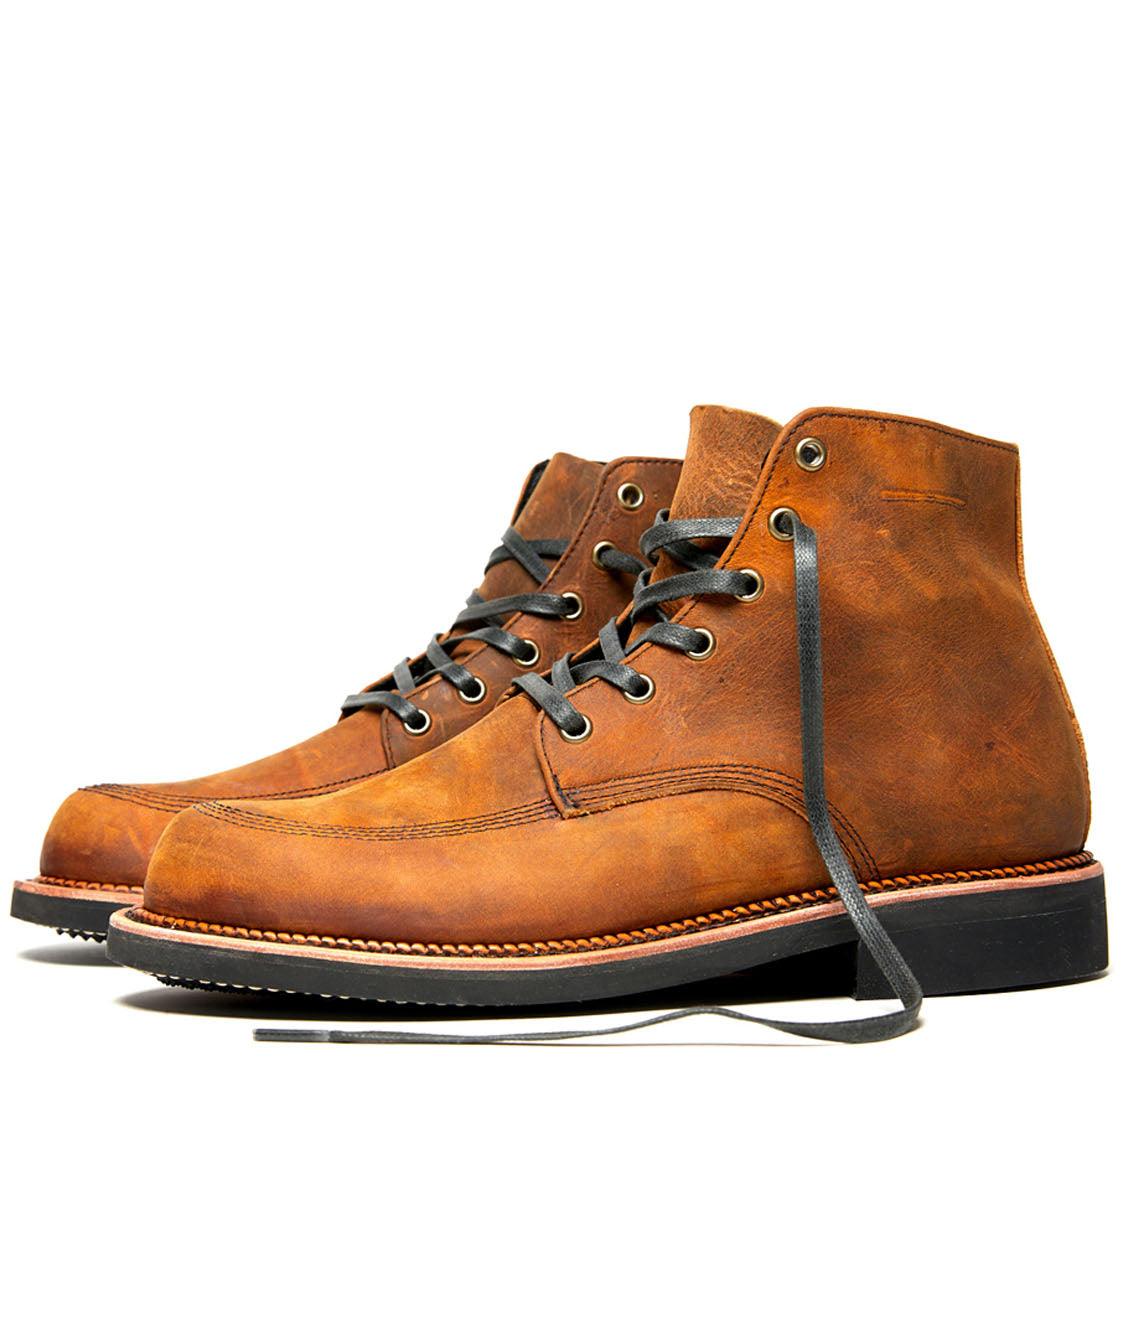 A comfortable Davis boot by Broken Homme on a white background.